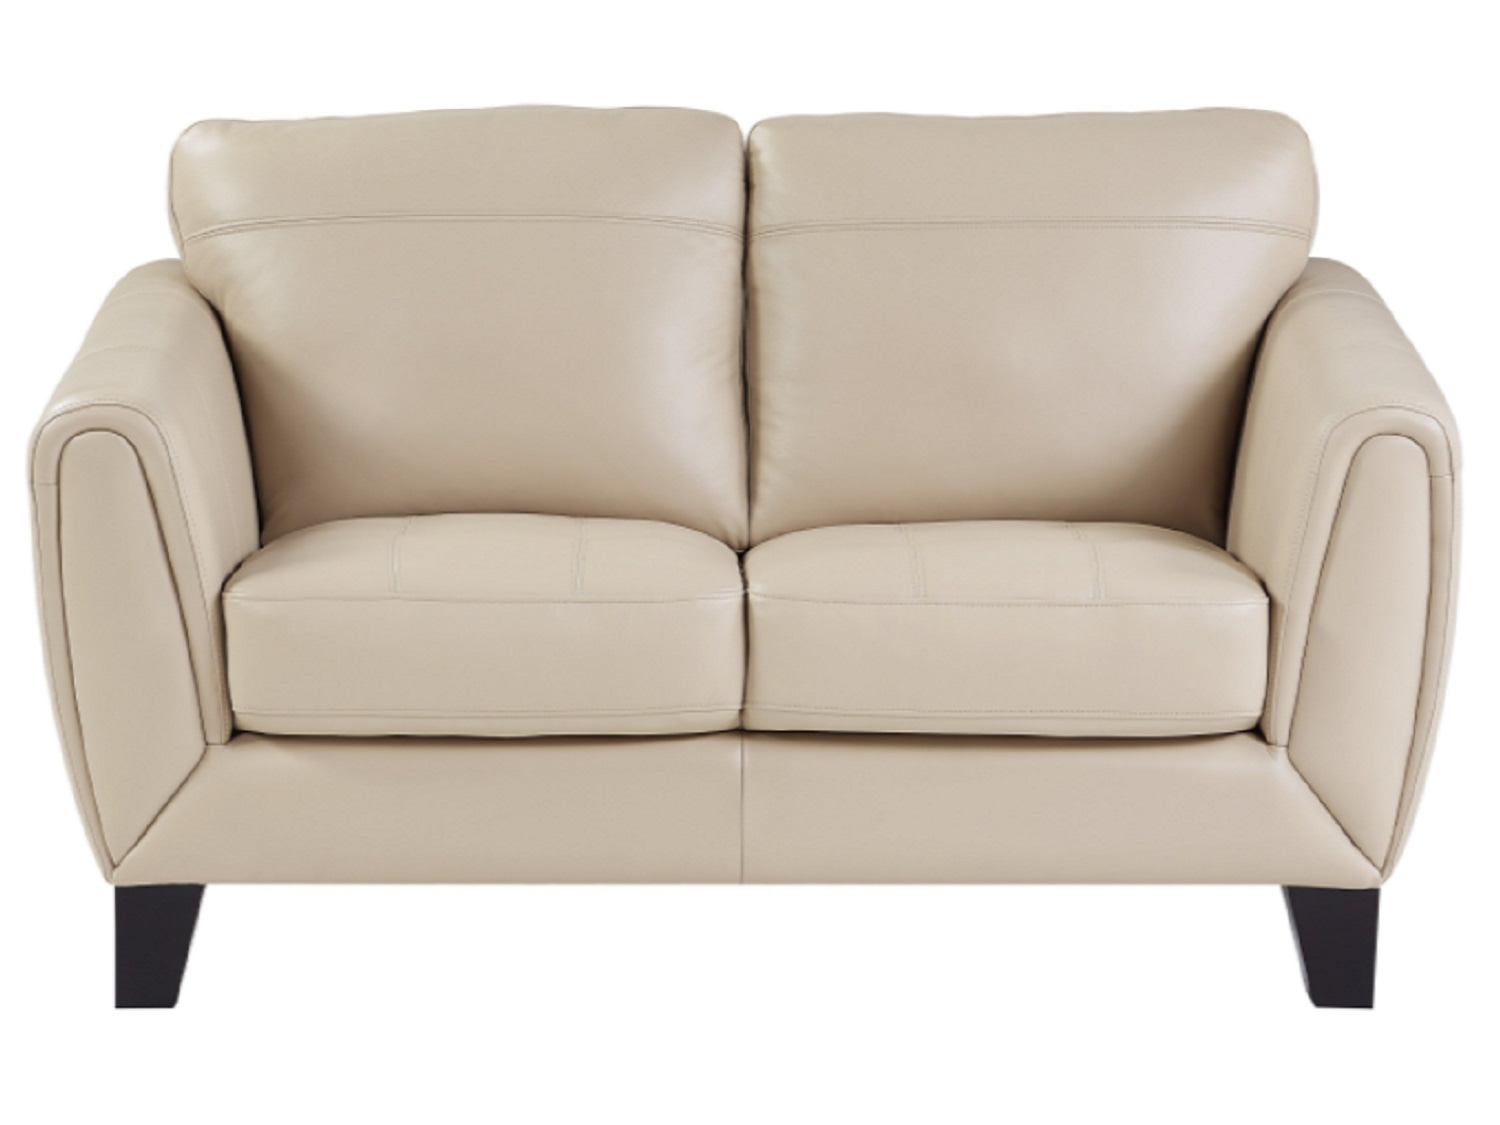 ROBLES Love-seat